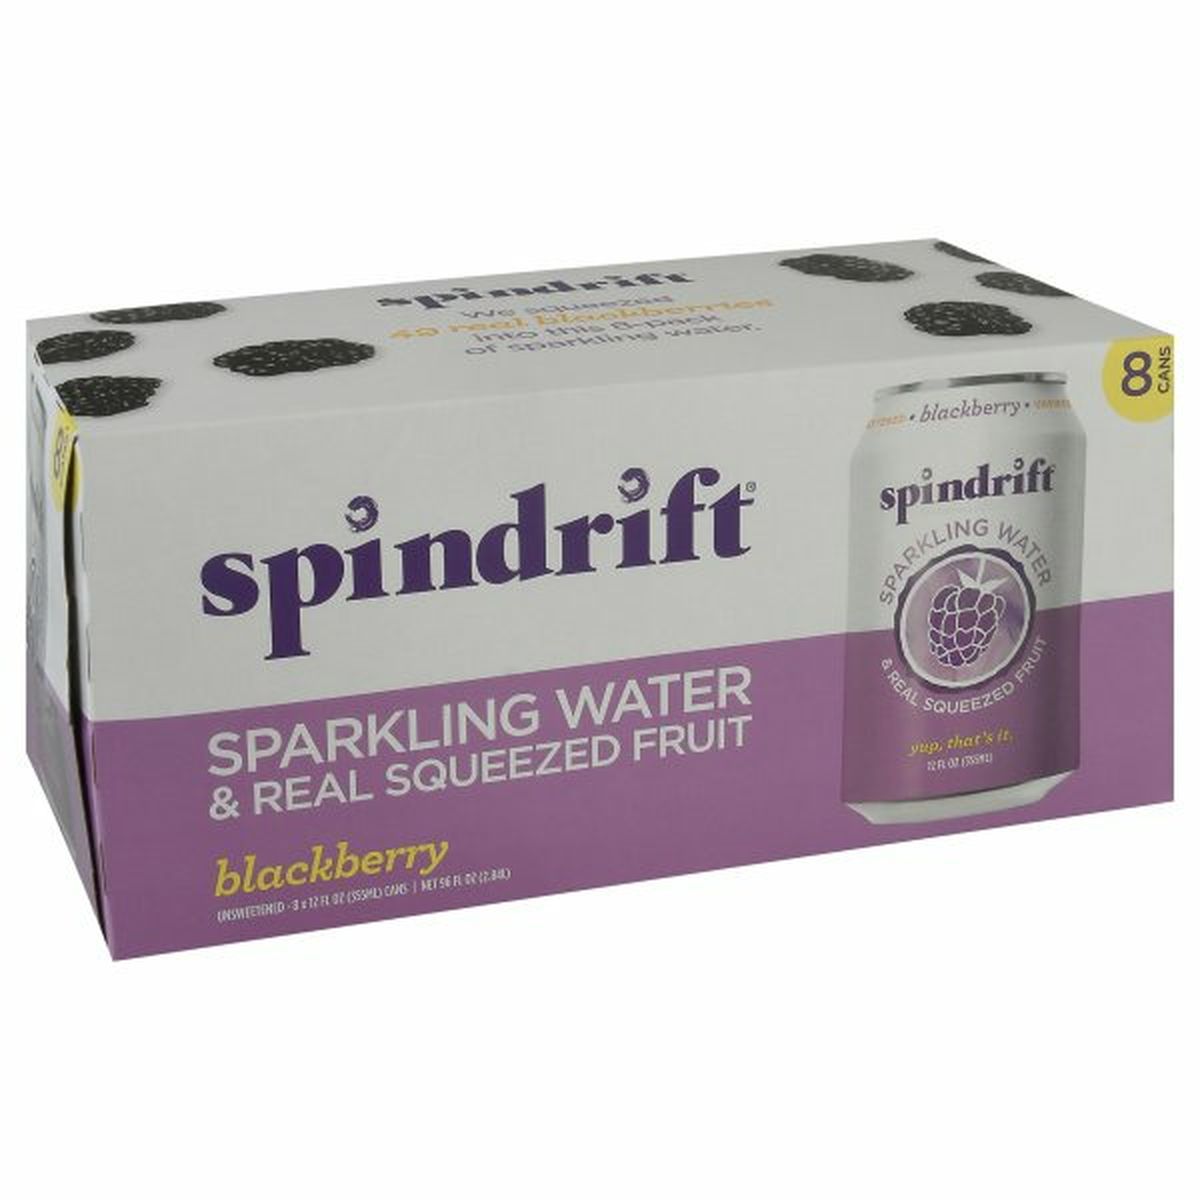 Calories in Spindrift Sparkling Water, Blackberry